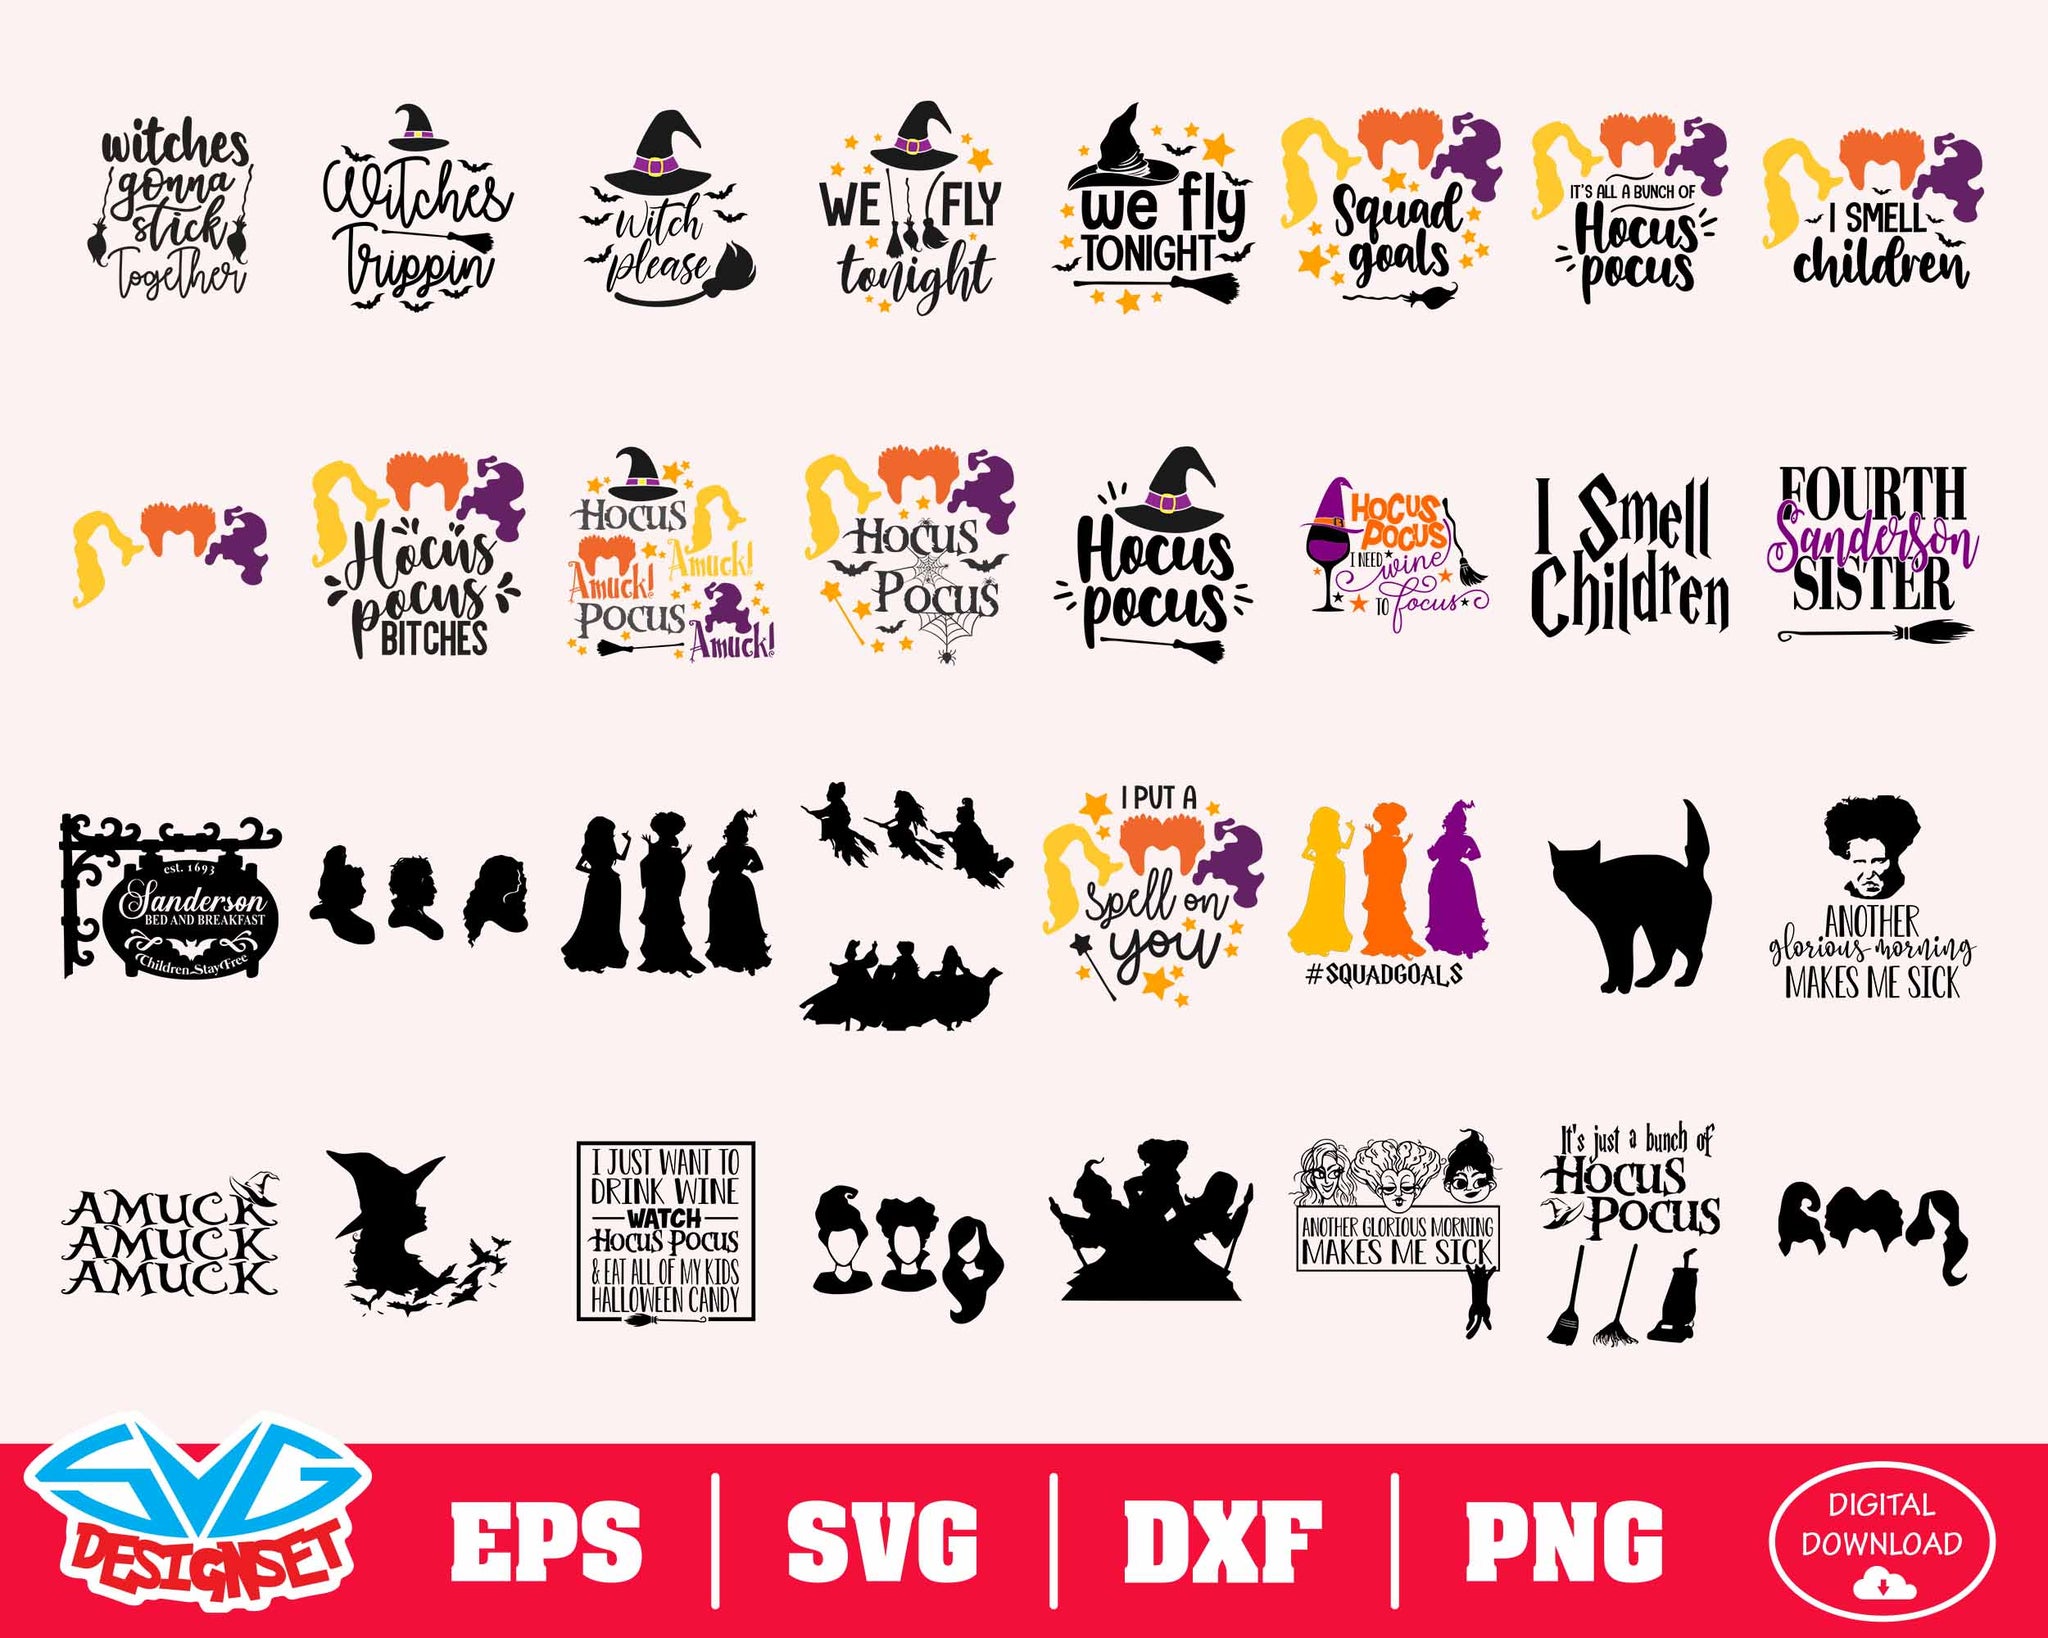 Hocus pocus Svg, Dxf, Eps, Png, Clipart, Silhouette and Cutfiles #4 - SVGDesignSets